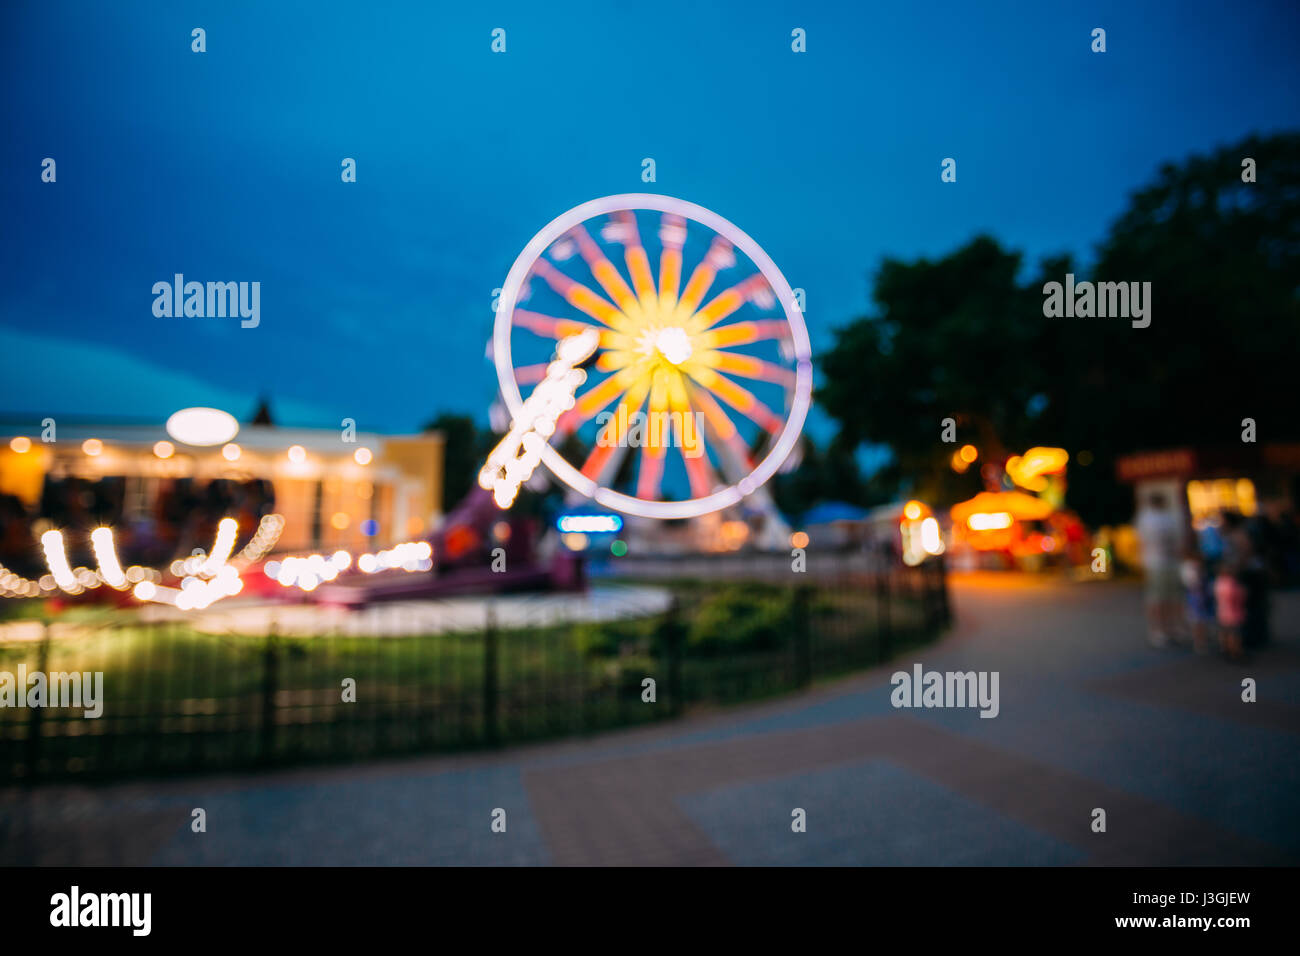 Abstract Motion Blur Image Of Brightly Colorful Illuminated Ferris Wheel In Amusement City Park On Black Blue Evening Sky Bokeh Boke Background. Stock Photo